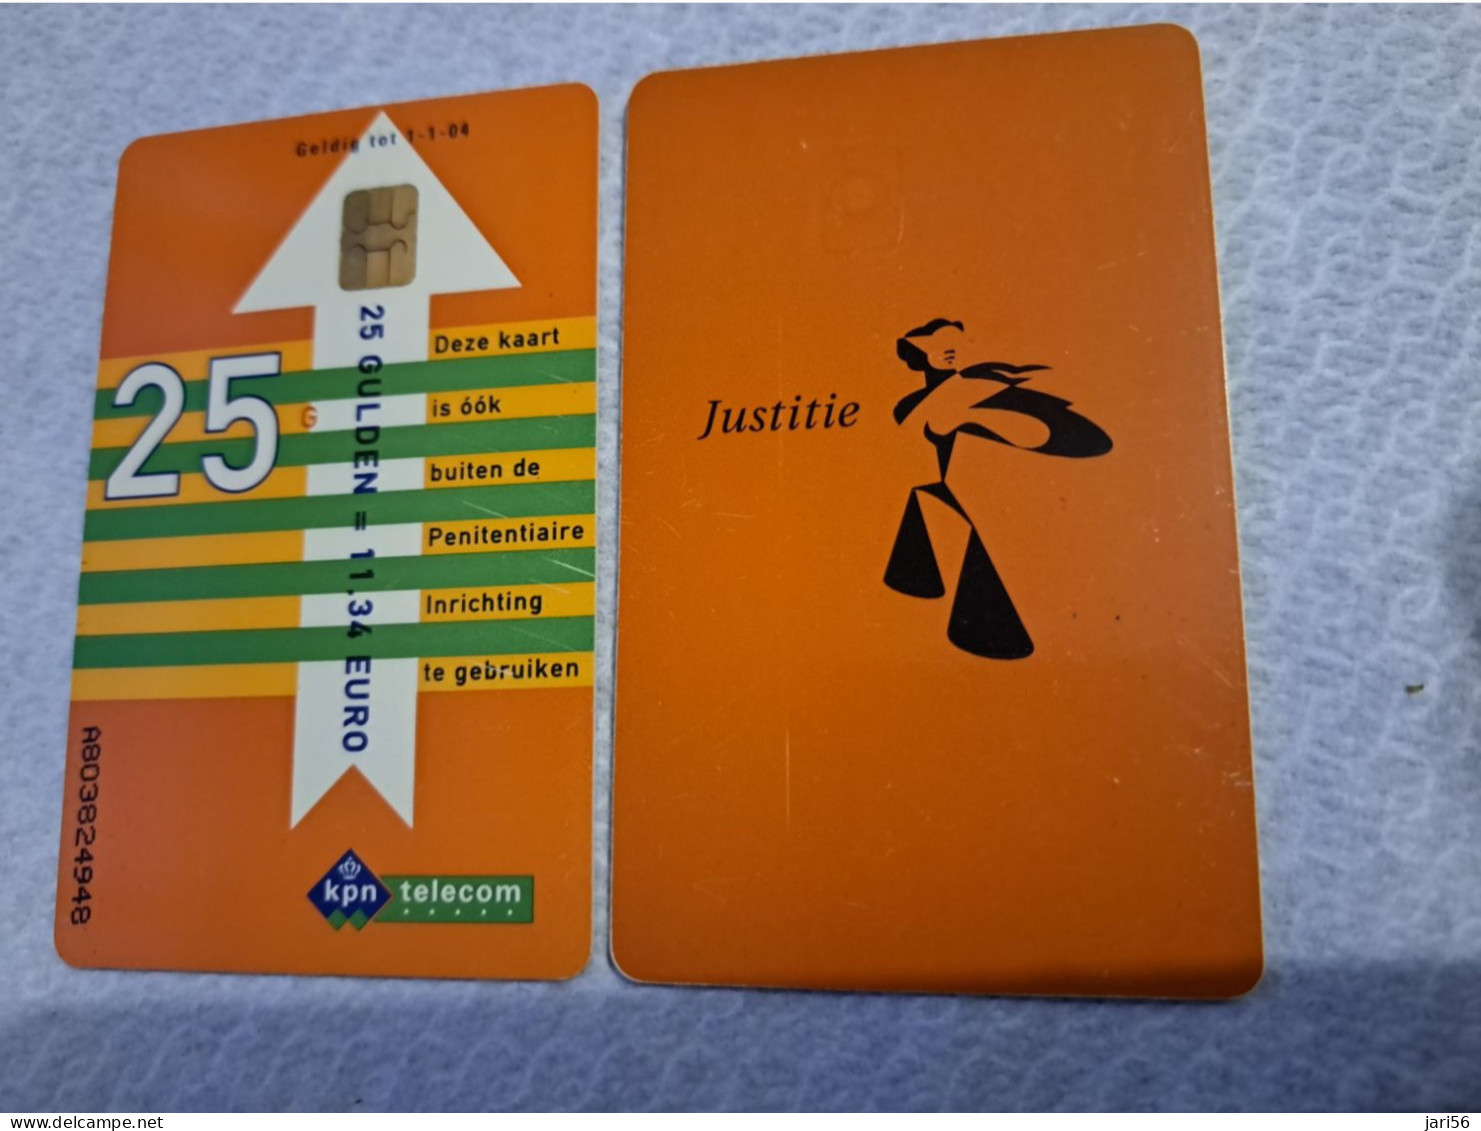 NETHERLANDS   HFL 25,-  / USED  / DATE  1-1-04  JUSTITIE/PRISON CARD  CHIP CARD/ USED   ** 16158** - [3] Sim Cards, Prepaid & Refills